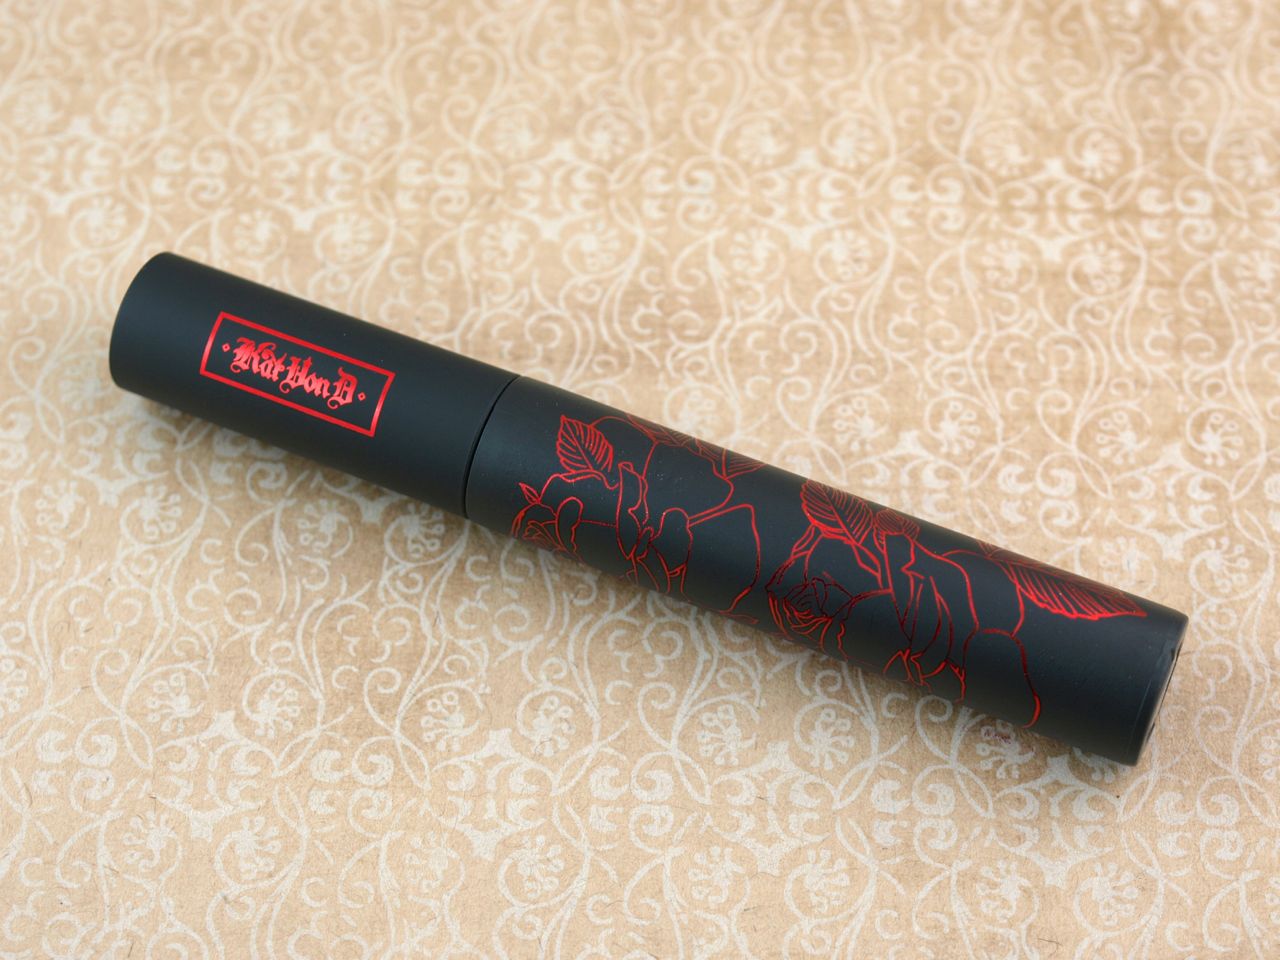 Kat Von D Immortal Lash 24 Hour Mascara: Review and Swatches